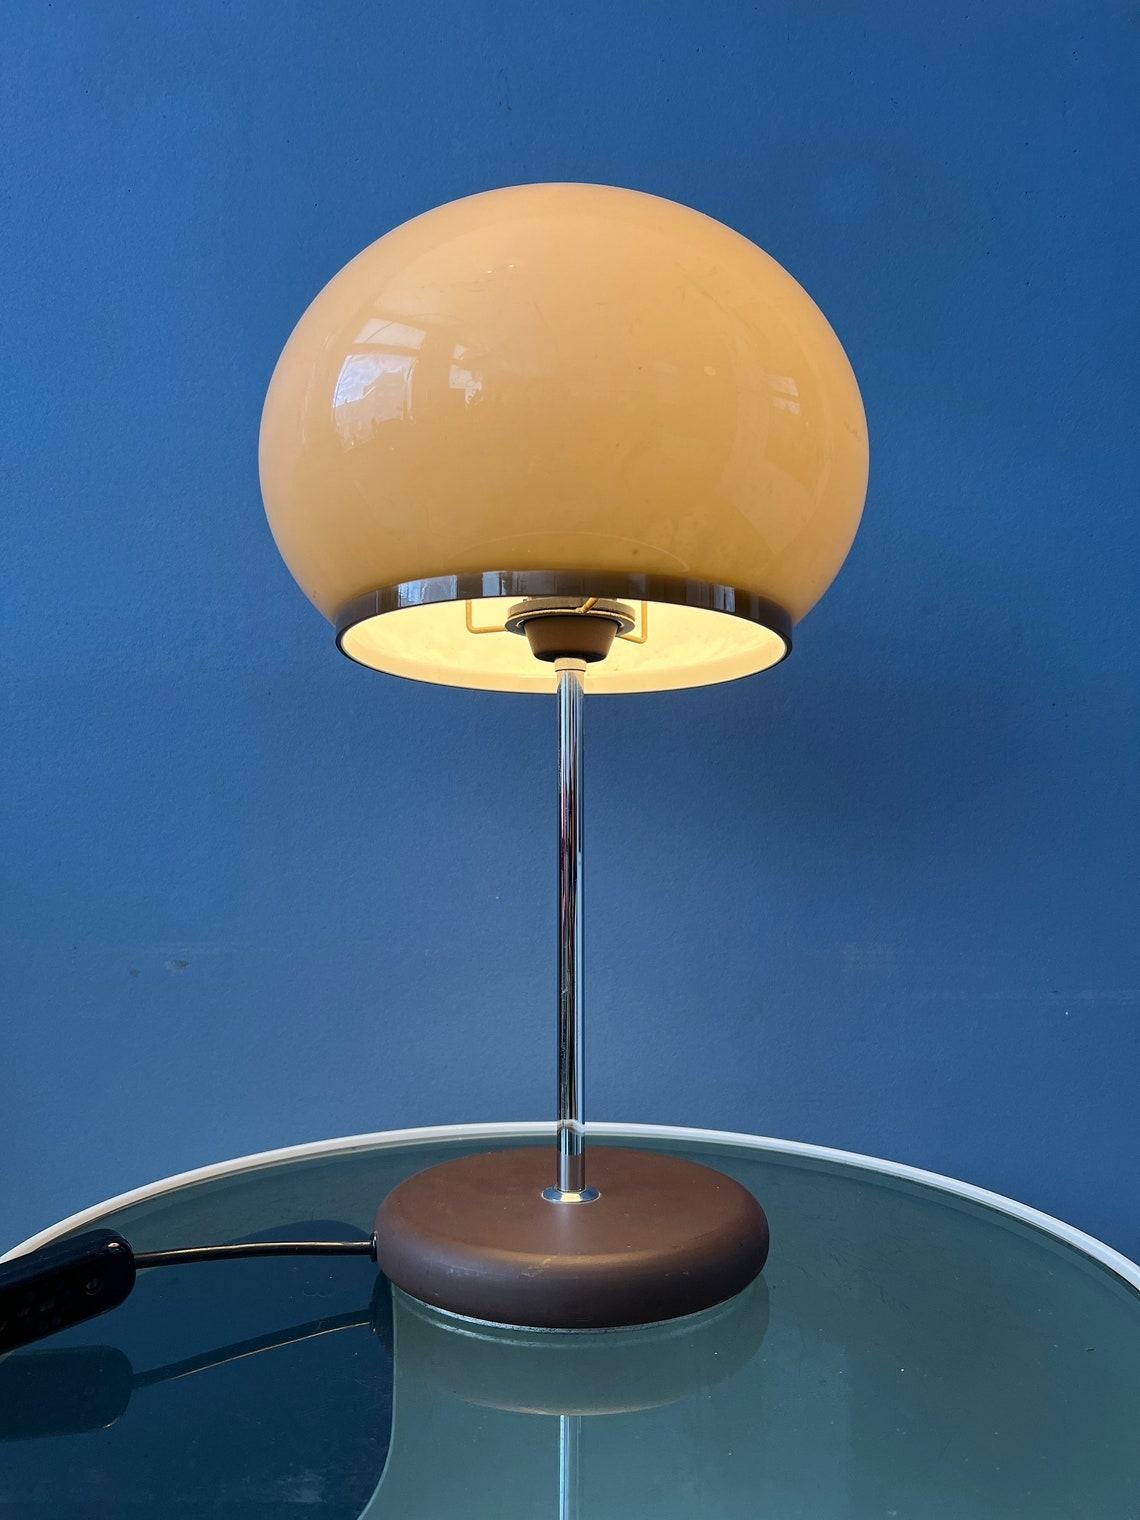 An oft sought-after mushroom table lamp by Dijkstra. The mocca-colored mushroom shade produces a warm, cosy light. The shade can be easily moved up and down the base. The lamp requires two E27 lightbulbs and currently has a EU-plug.

Additional